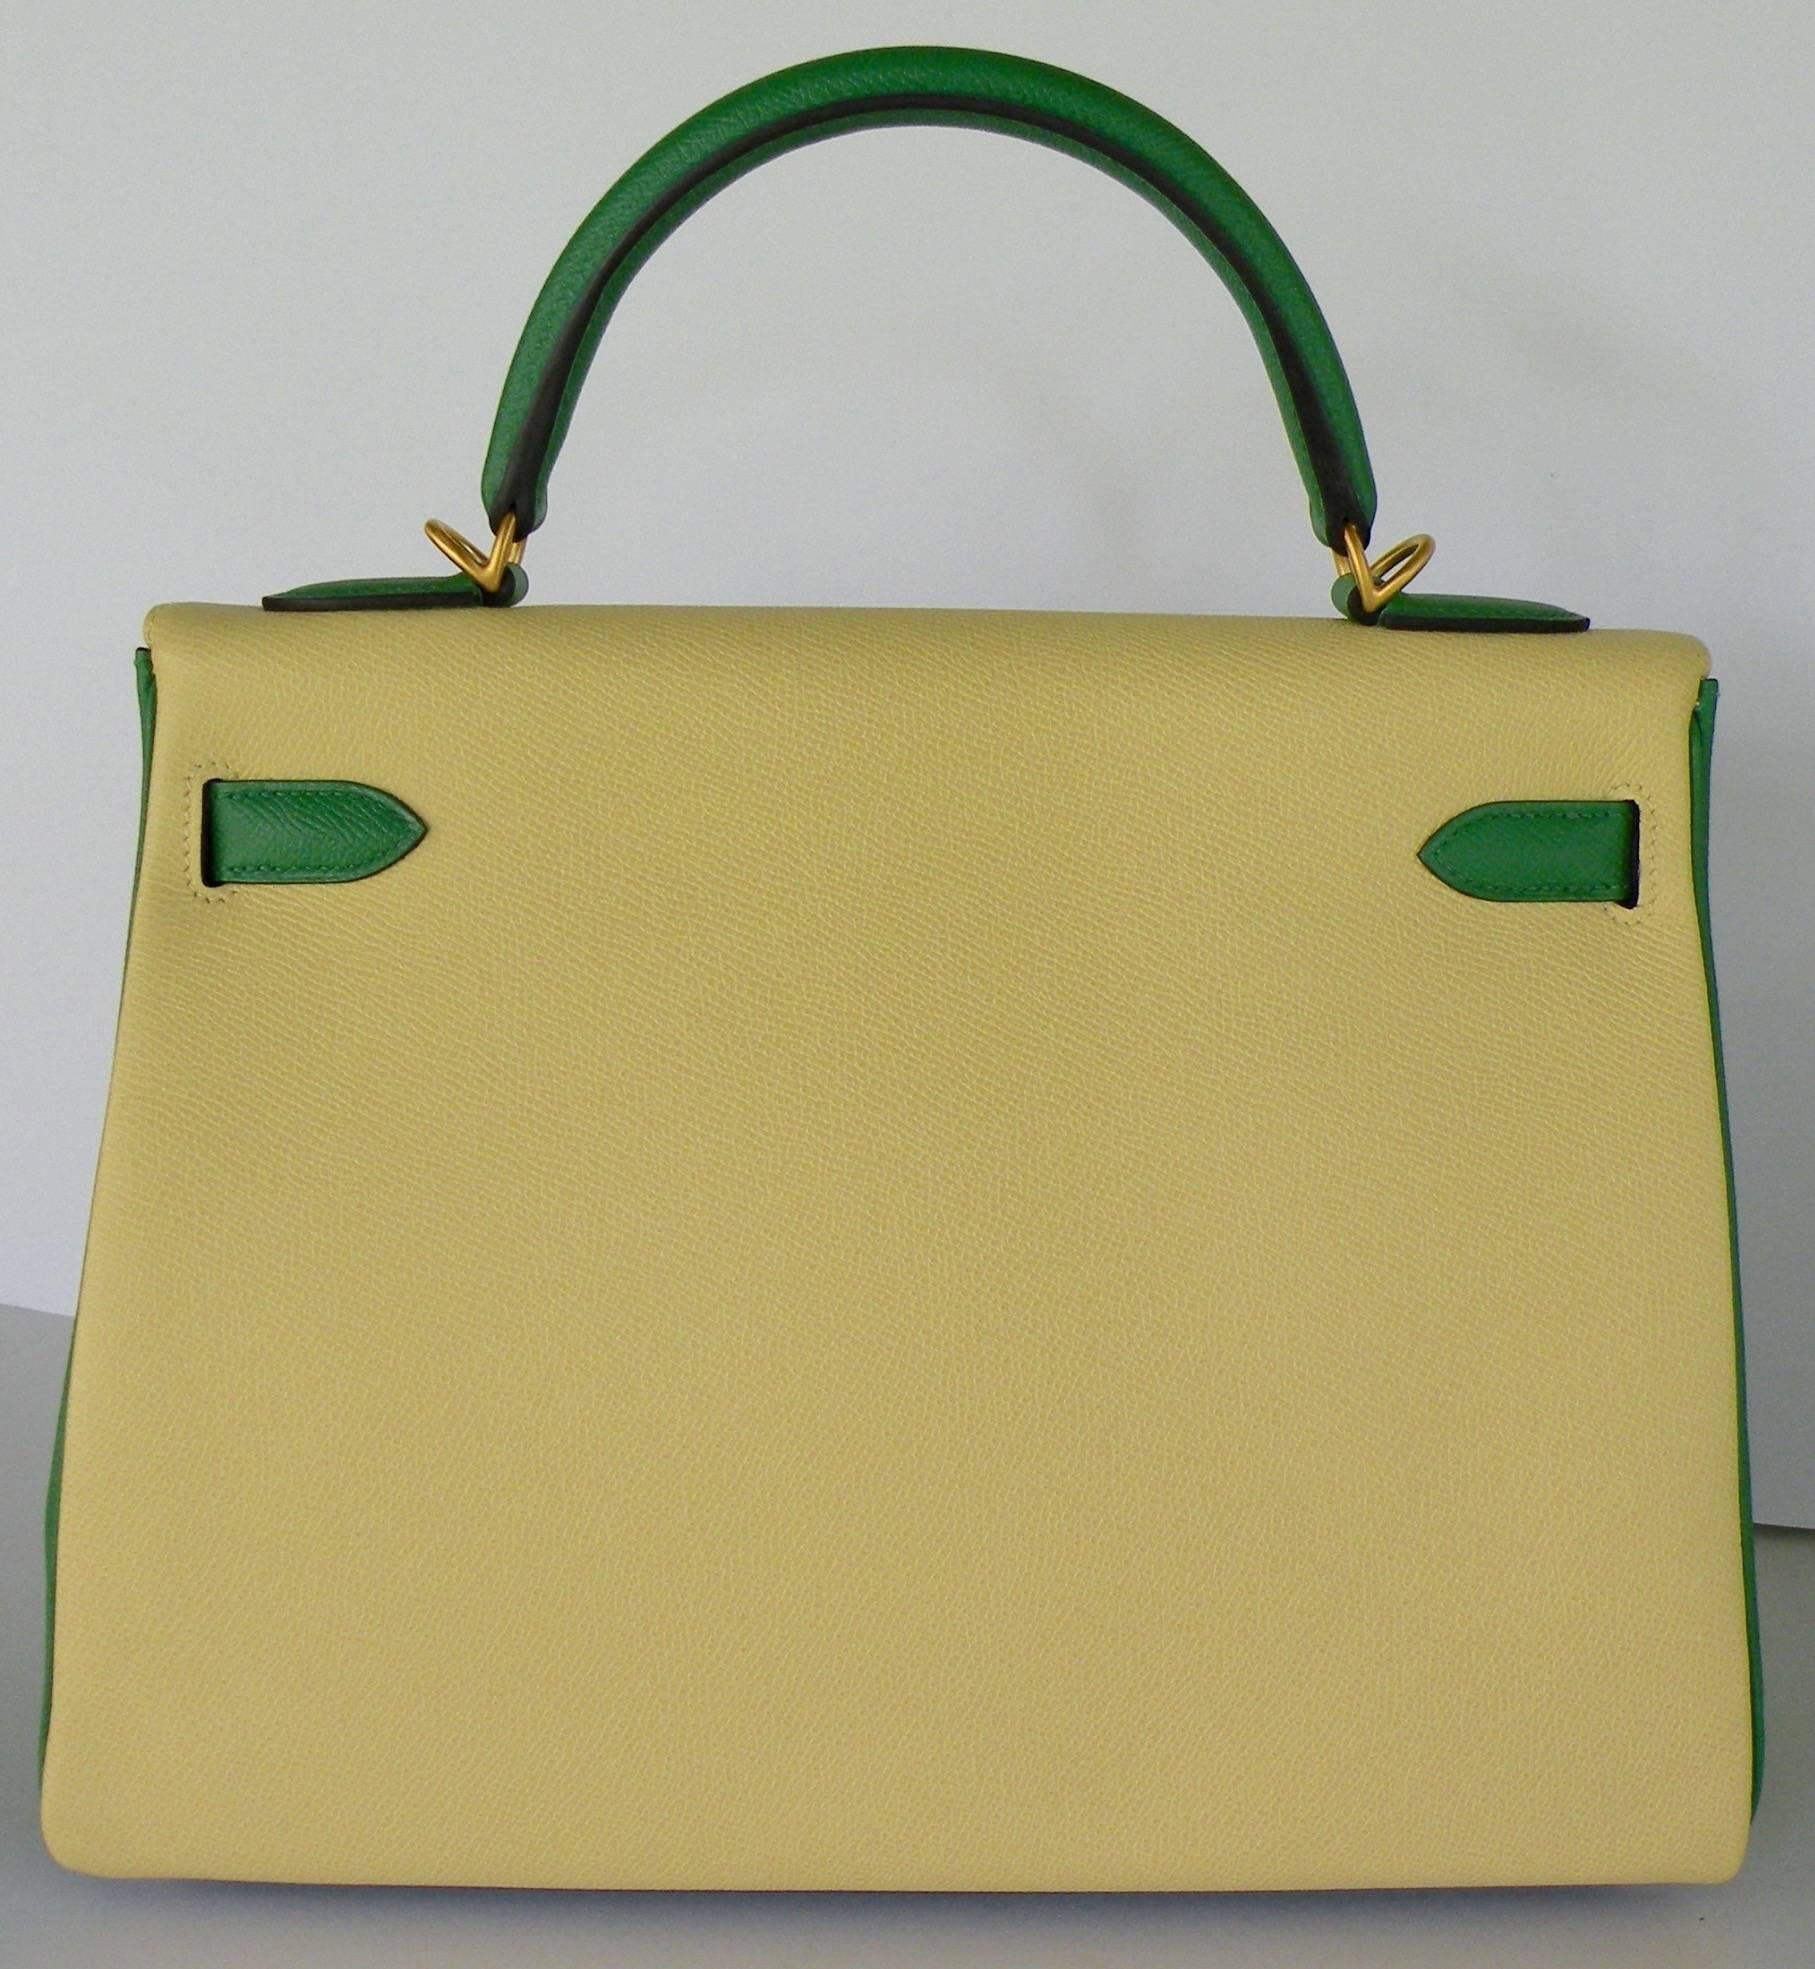 Hermes Kelly 32 cm 

Special Order for VIP client

Tri color
One of a Kind

Blue electric, Bamboo, and Jaune Poussin Epsom Leather

Brush Gold Hardware

Heads will turn

One of a Kind

Amazing combination

You dont find Tri colors anymore

This is a